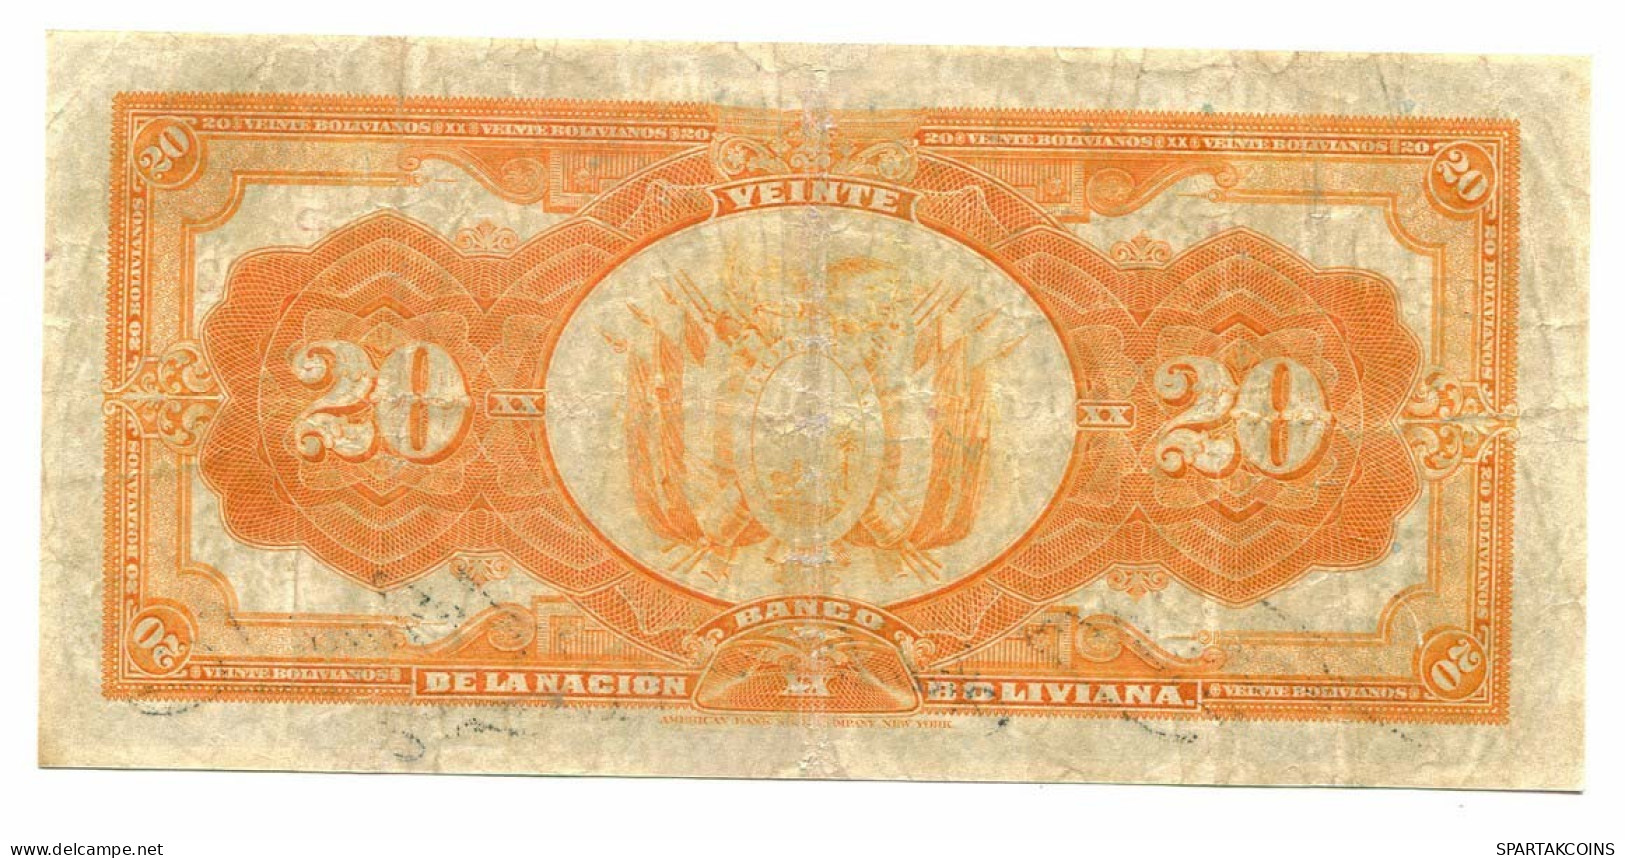 BOLIVIA 20 BOLIVIANOS 1911 SERIE D Paper Money Banknote #P10795.4 - [11] Emissions Locales